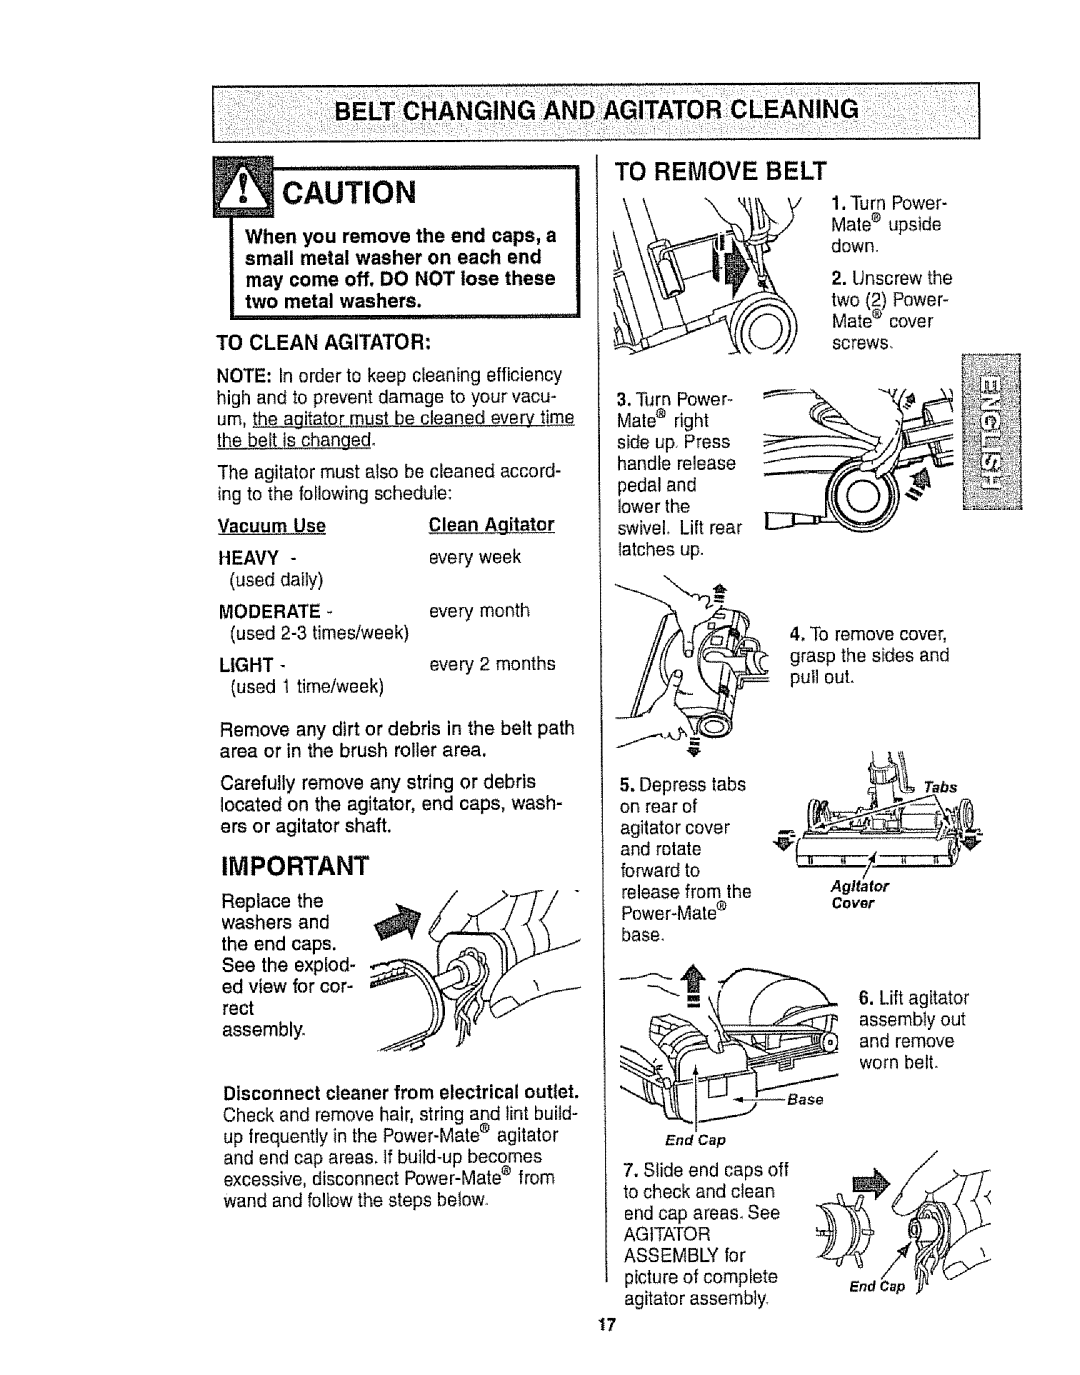 Kenmore 116.22812 E CAUTION, i, To Clean Agitator, Turn Power, Mate upside, down, Unscrew the, two 2 Power, Mate cover 